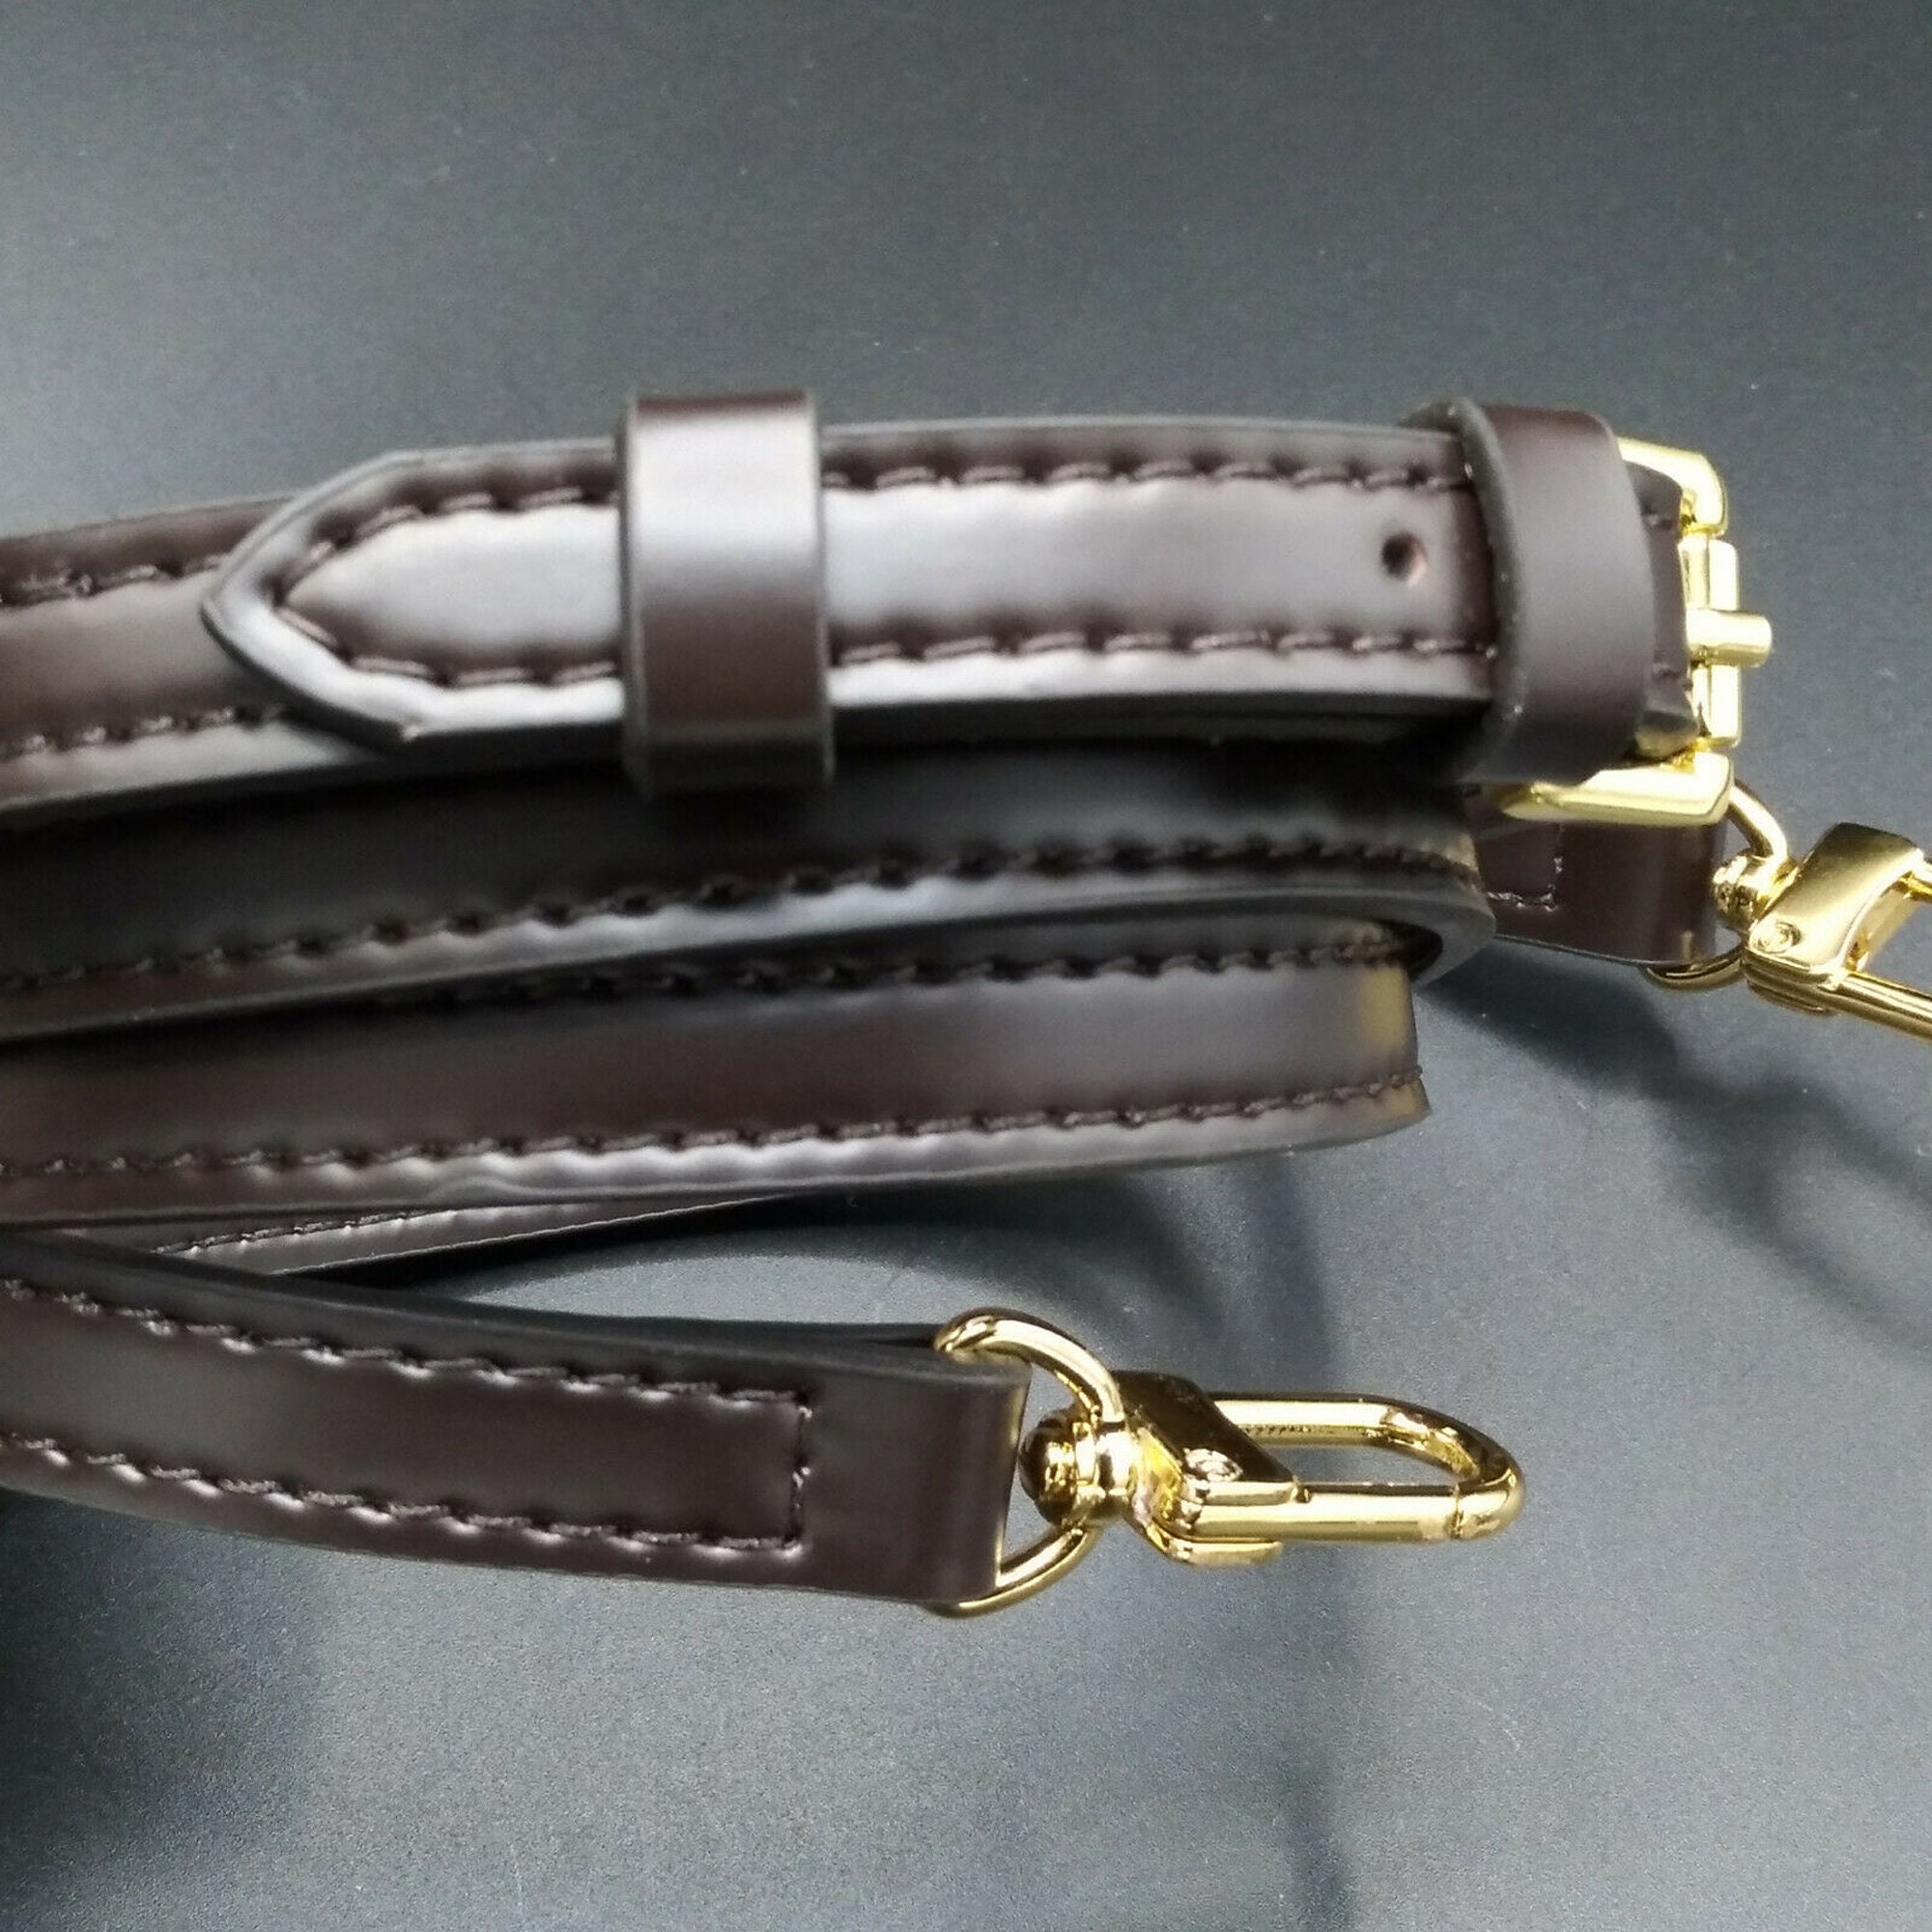 100% Genuine Leather 105CM Bag Strap for LV Neverfull Bags Adjustable  Handbags Straps Crossbody Replacement Bag Accessories